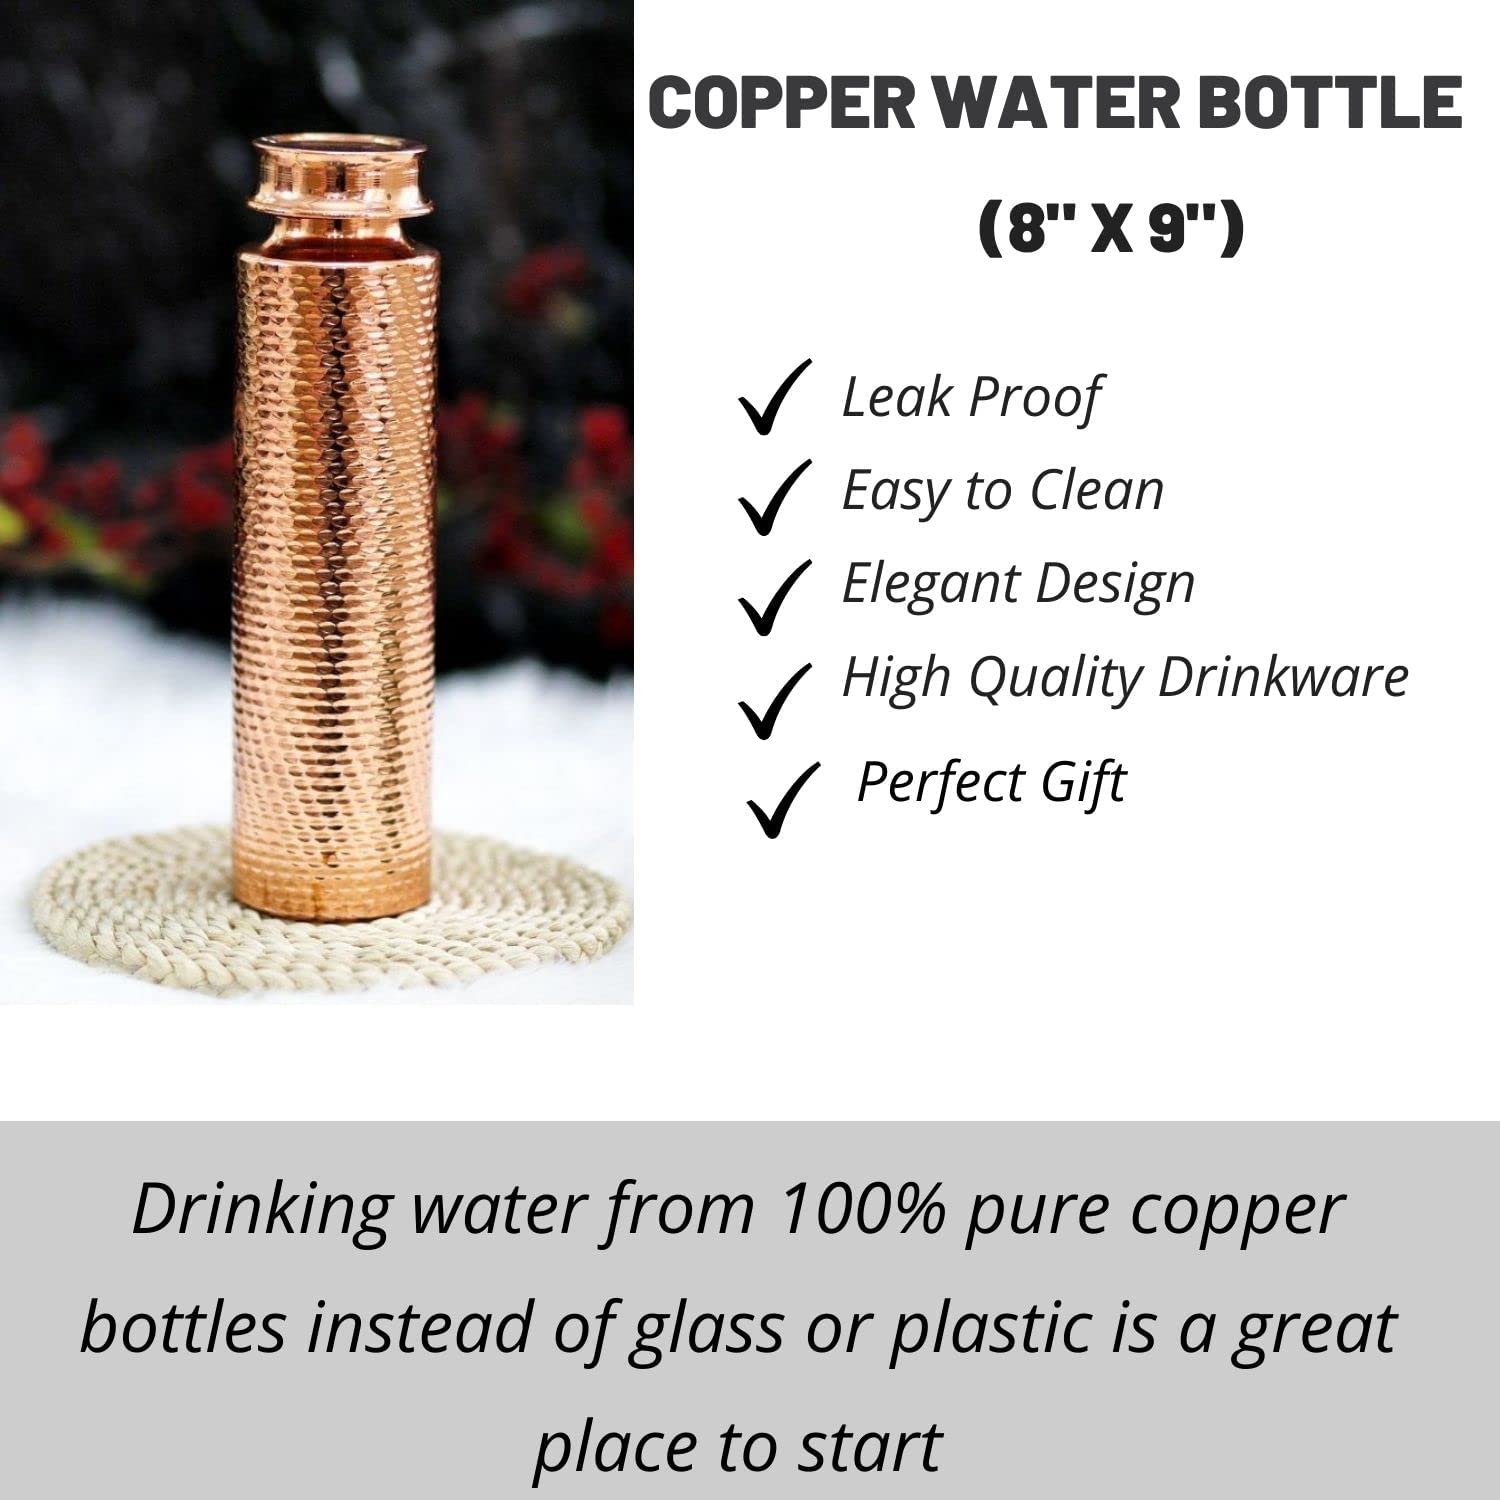 Kamojo Copper Water Bottle for Drinking - Hammered Copper Bottle with Push Button Lid, Removable Sleeve & Copper Straw - Hiking Gym Handcrafted